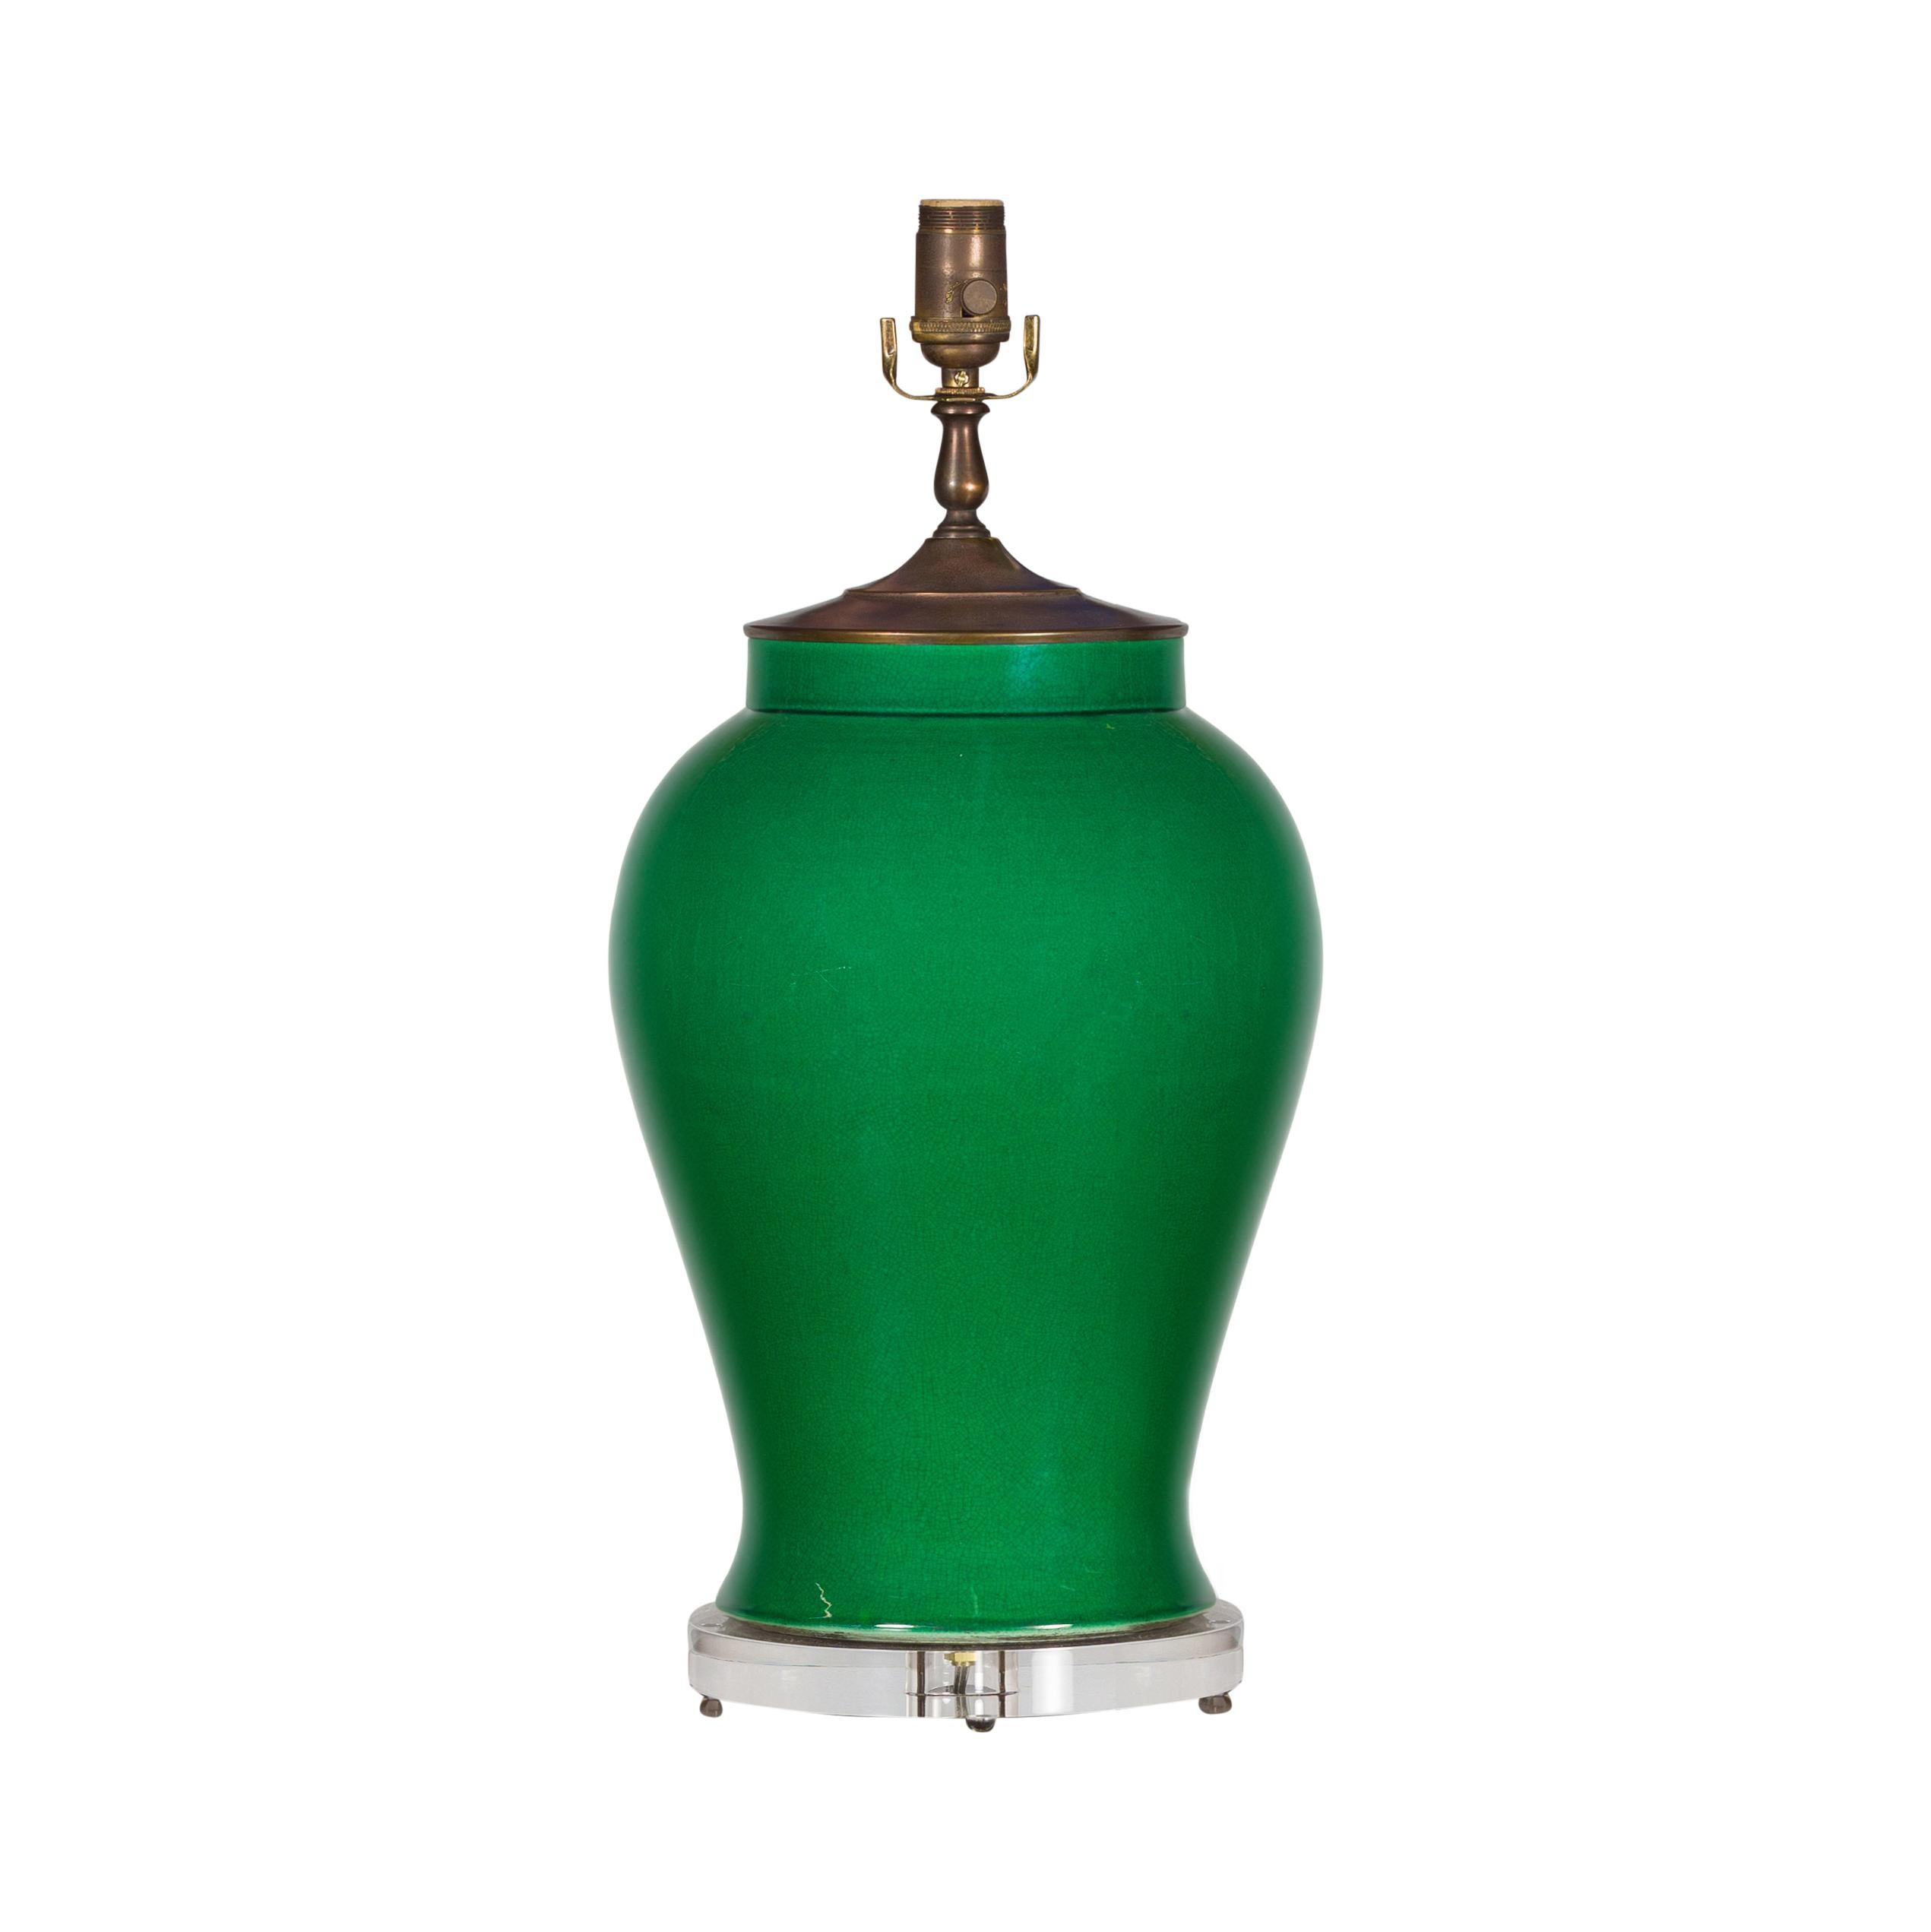 Green Porcelain Table Lamp with Discreet Crackle Finish on Lucite Base For Sale 8